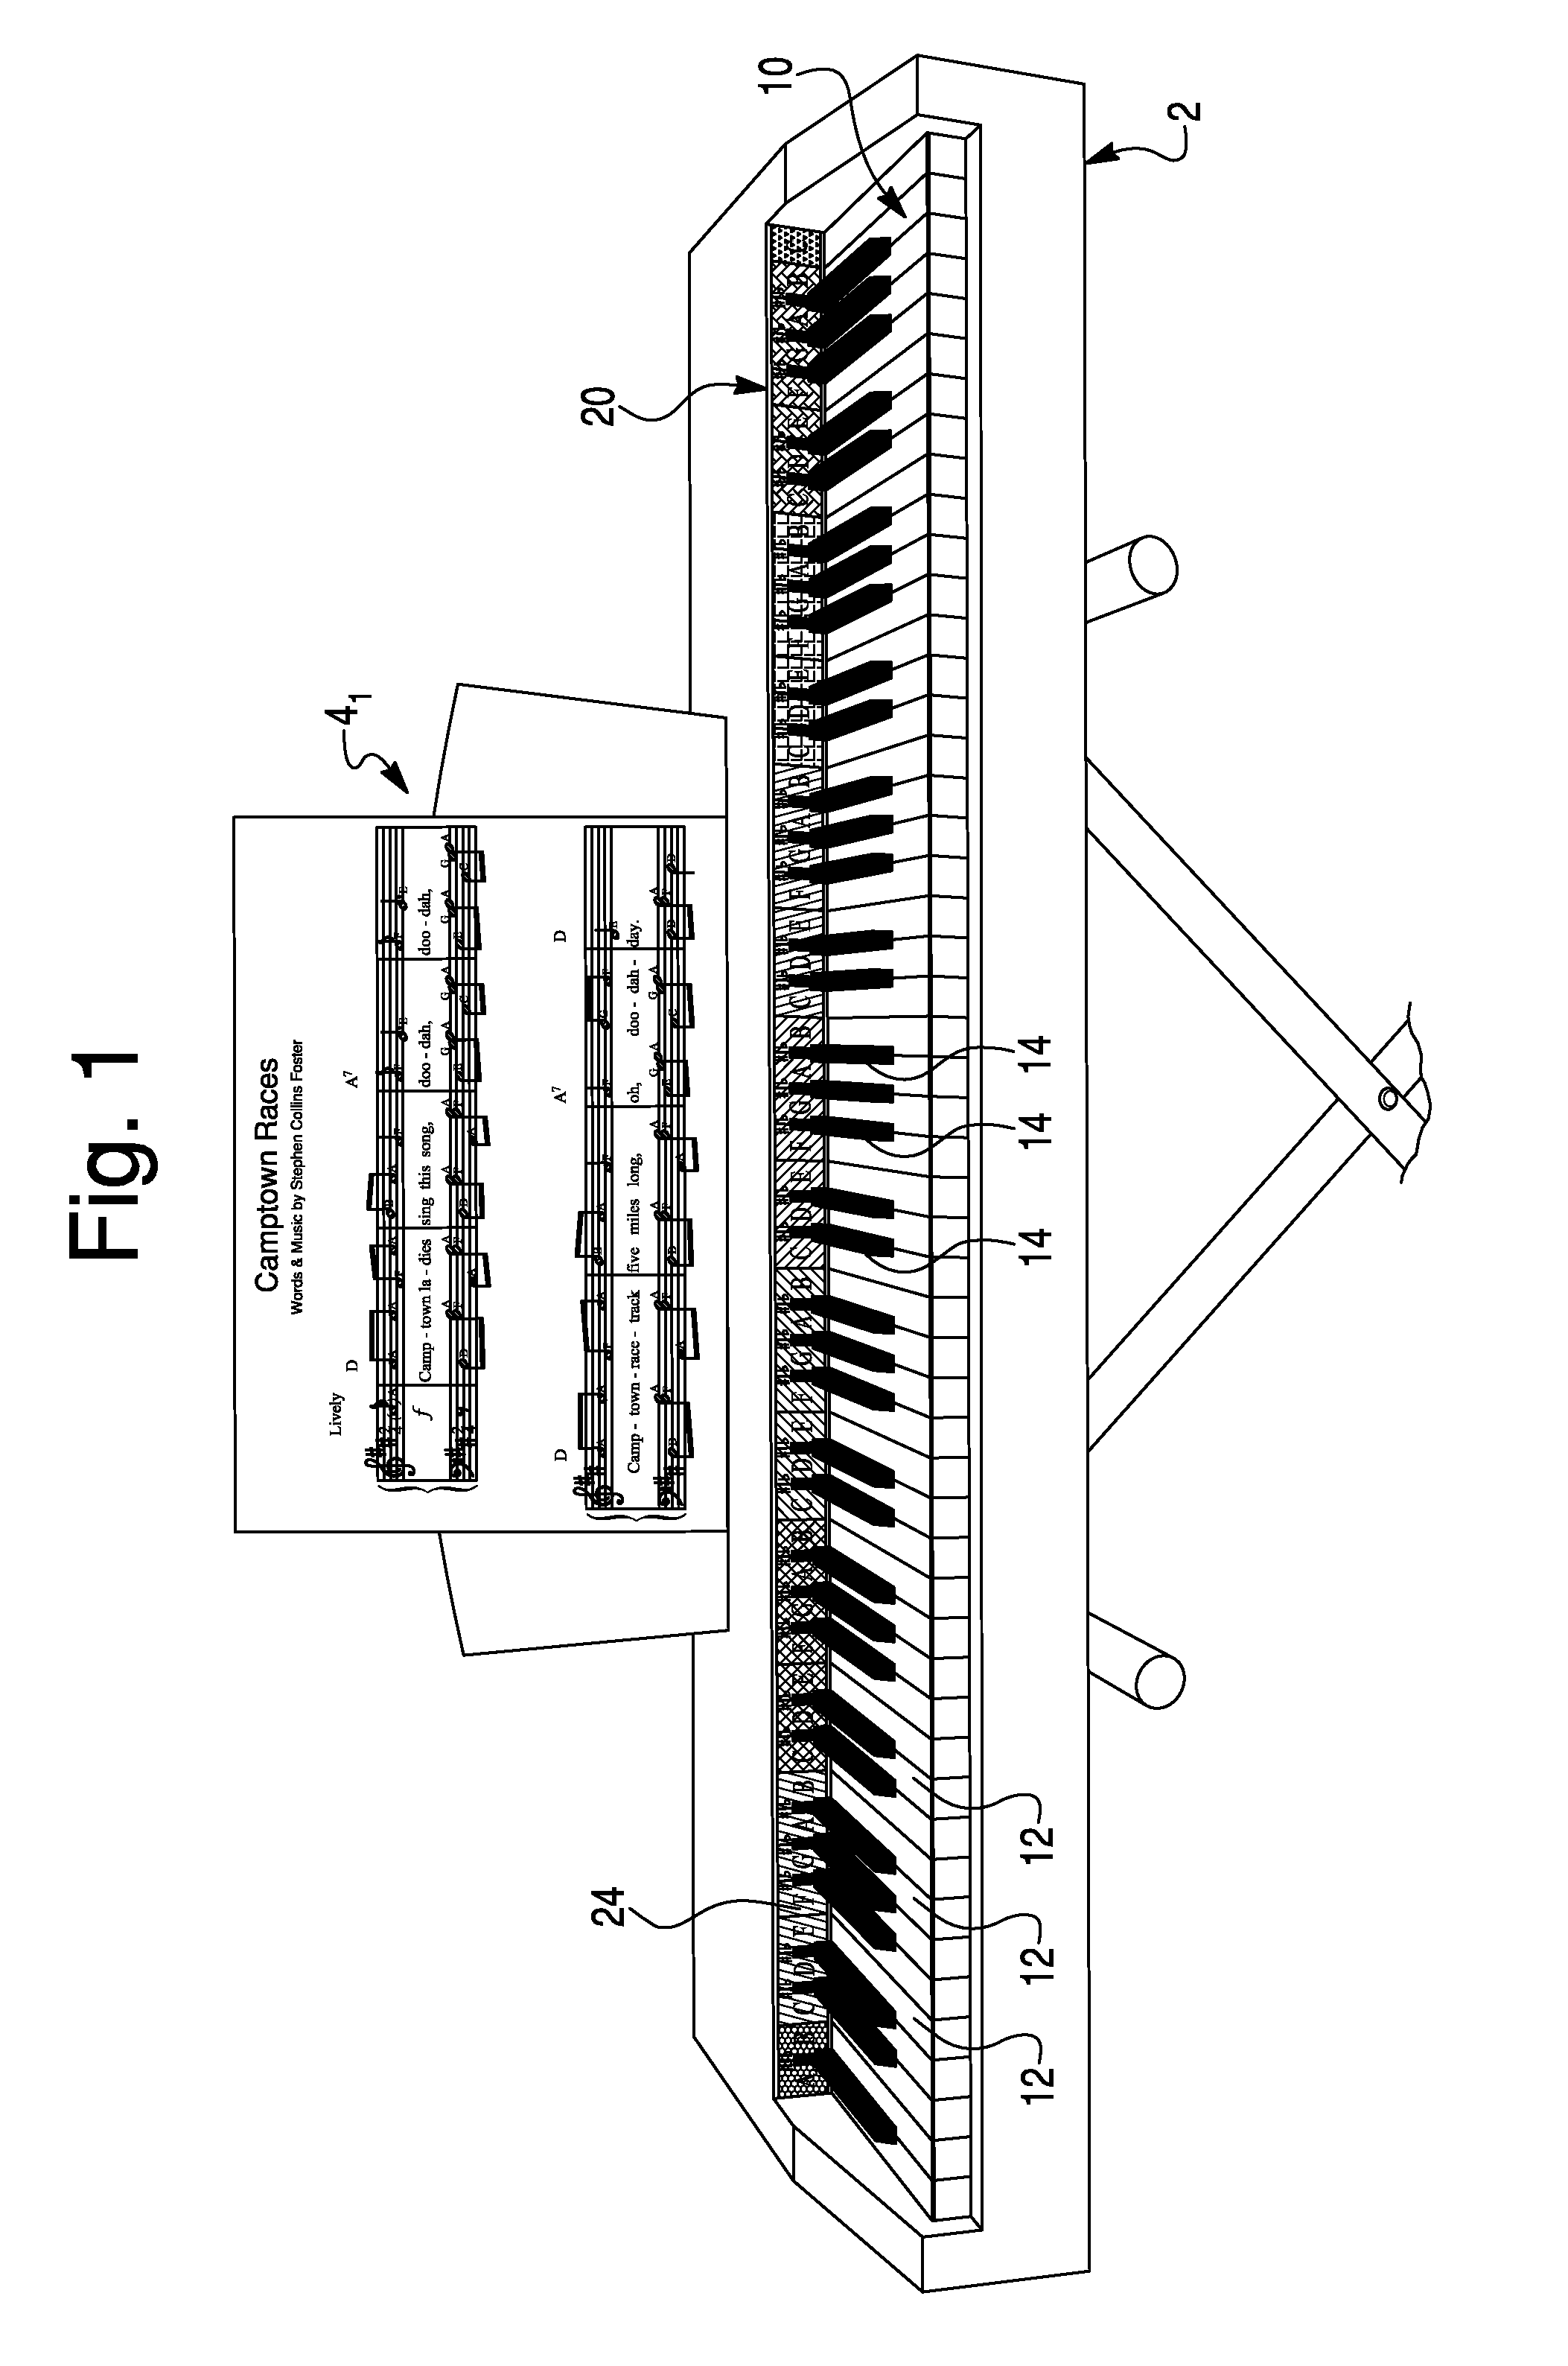 System of associating sheet music notation with keyboard keys and sight reading